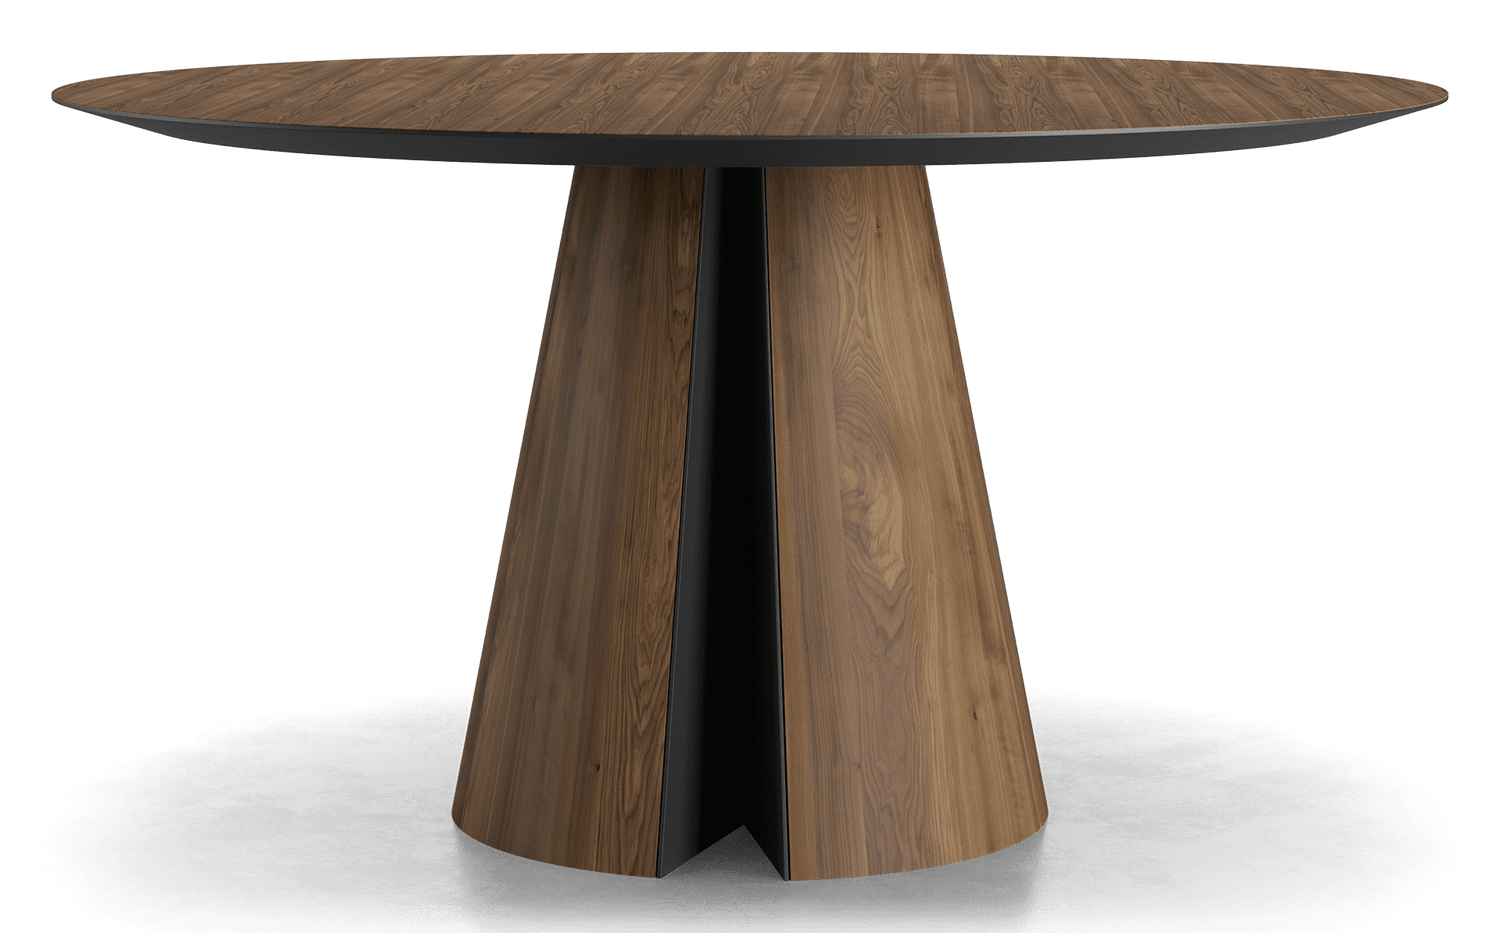 What's the ideal distance between chairs in a dining table?